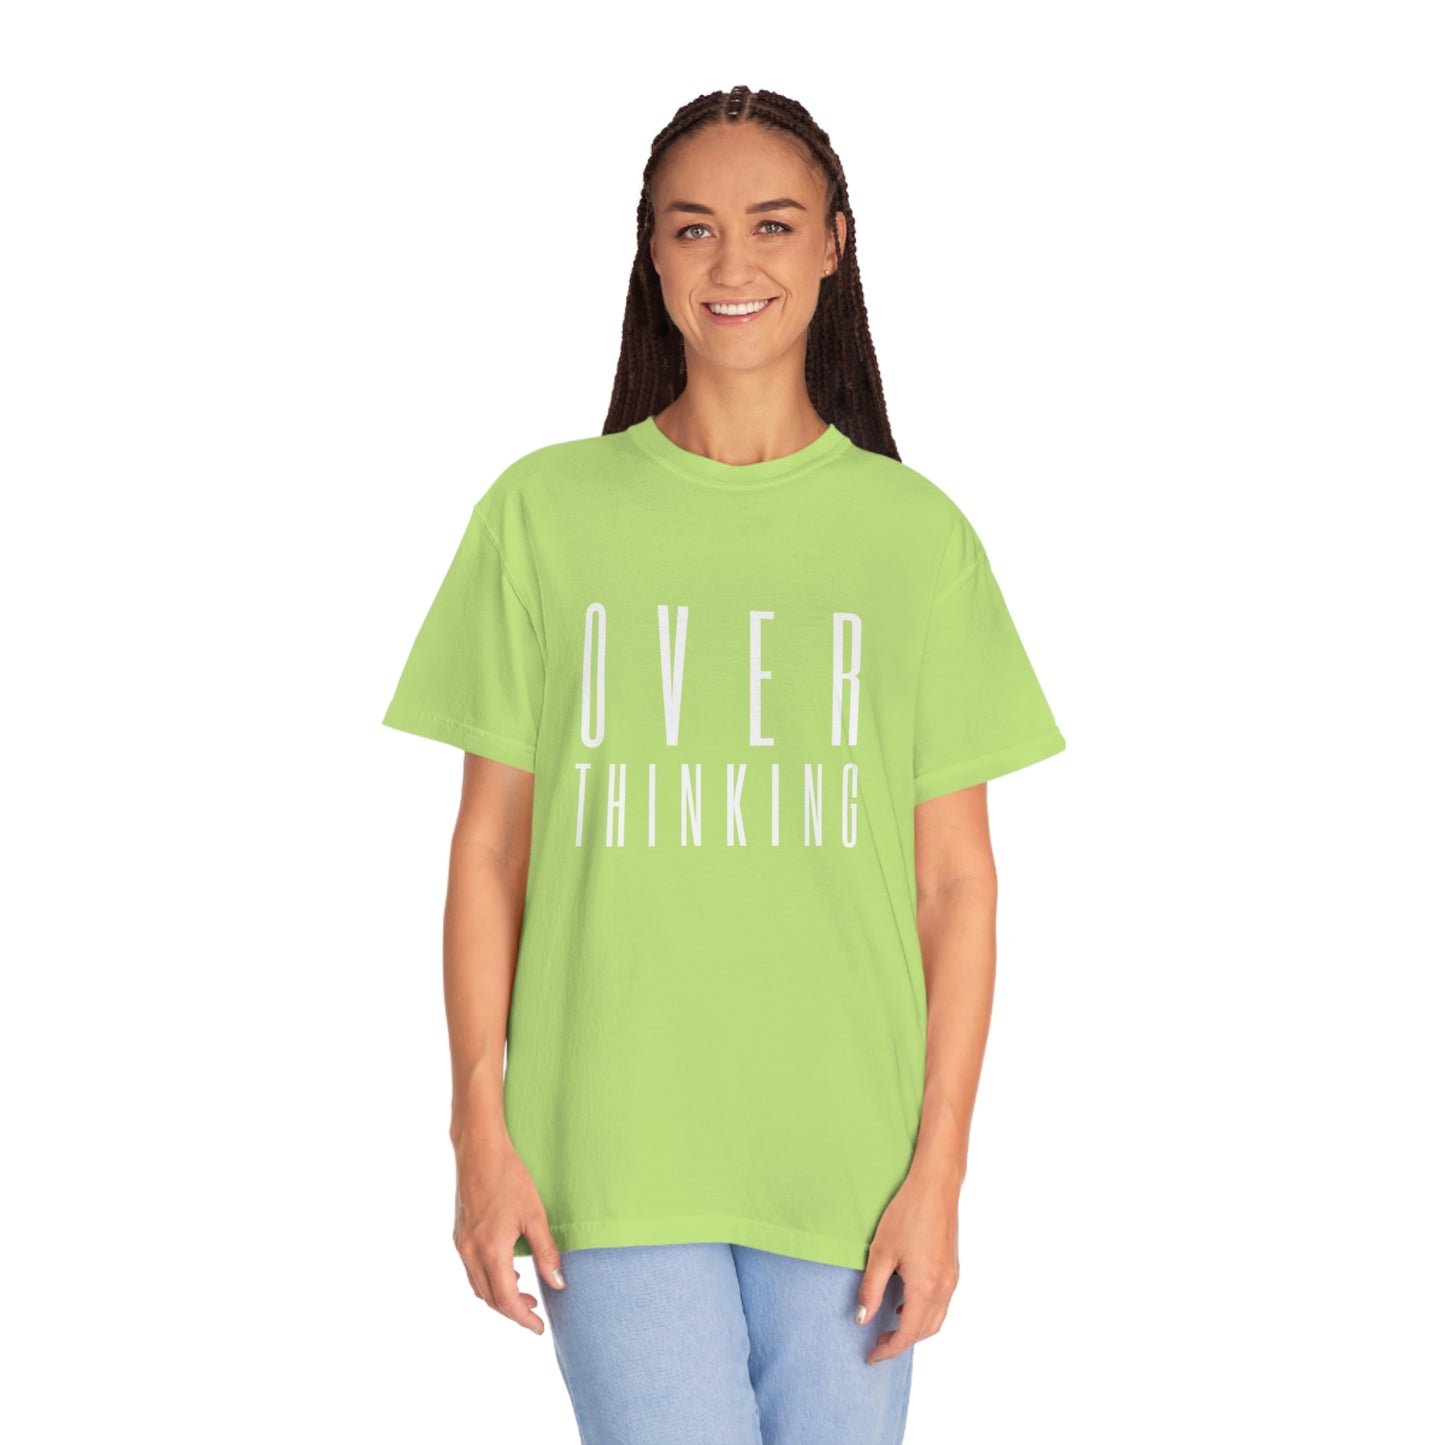 "Over Thinking" Comfort Colors T-shirt